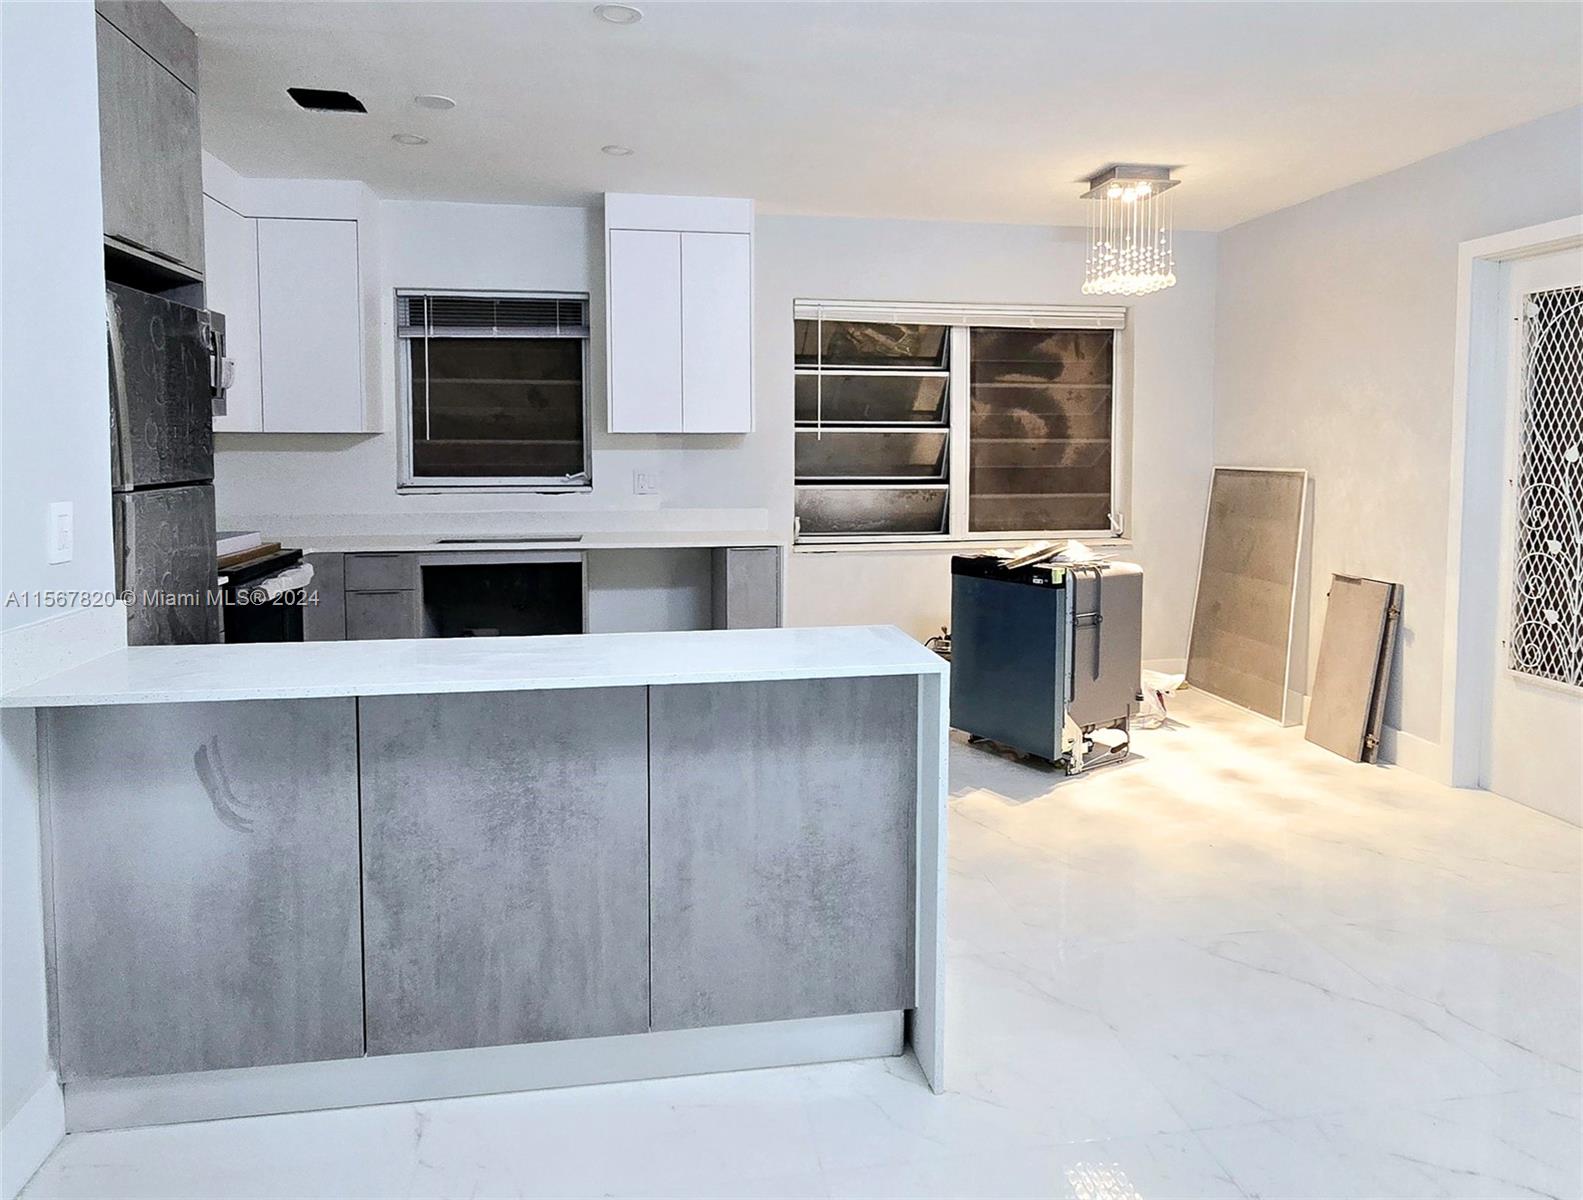 a kitchen with stainless steel appliances a microwave and refrigerator